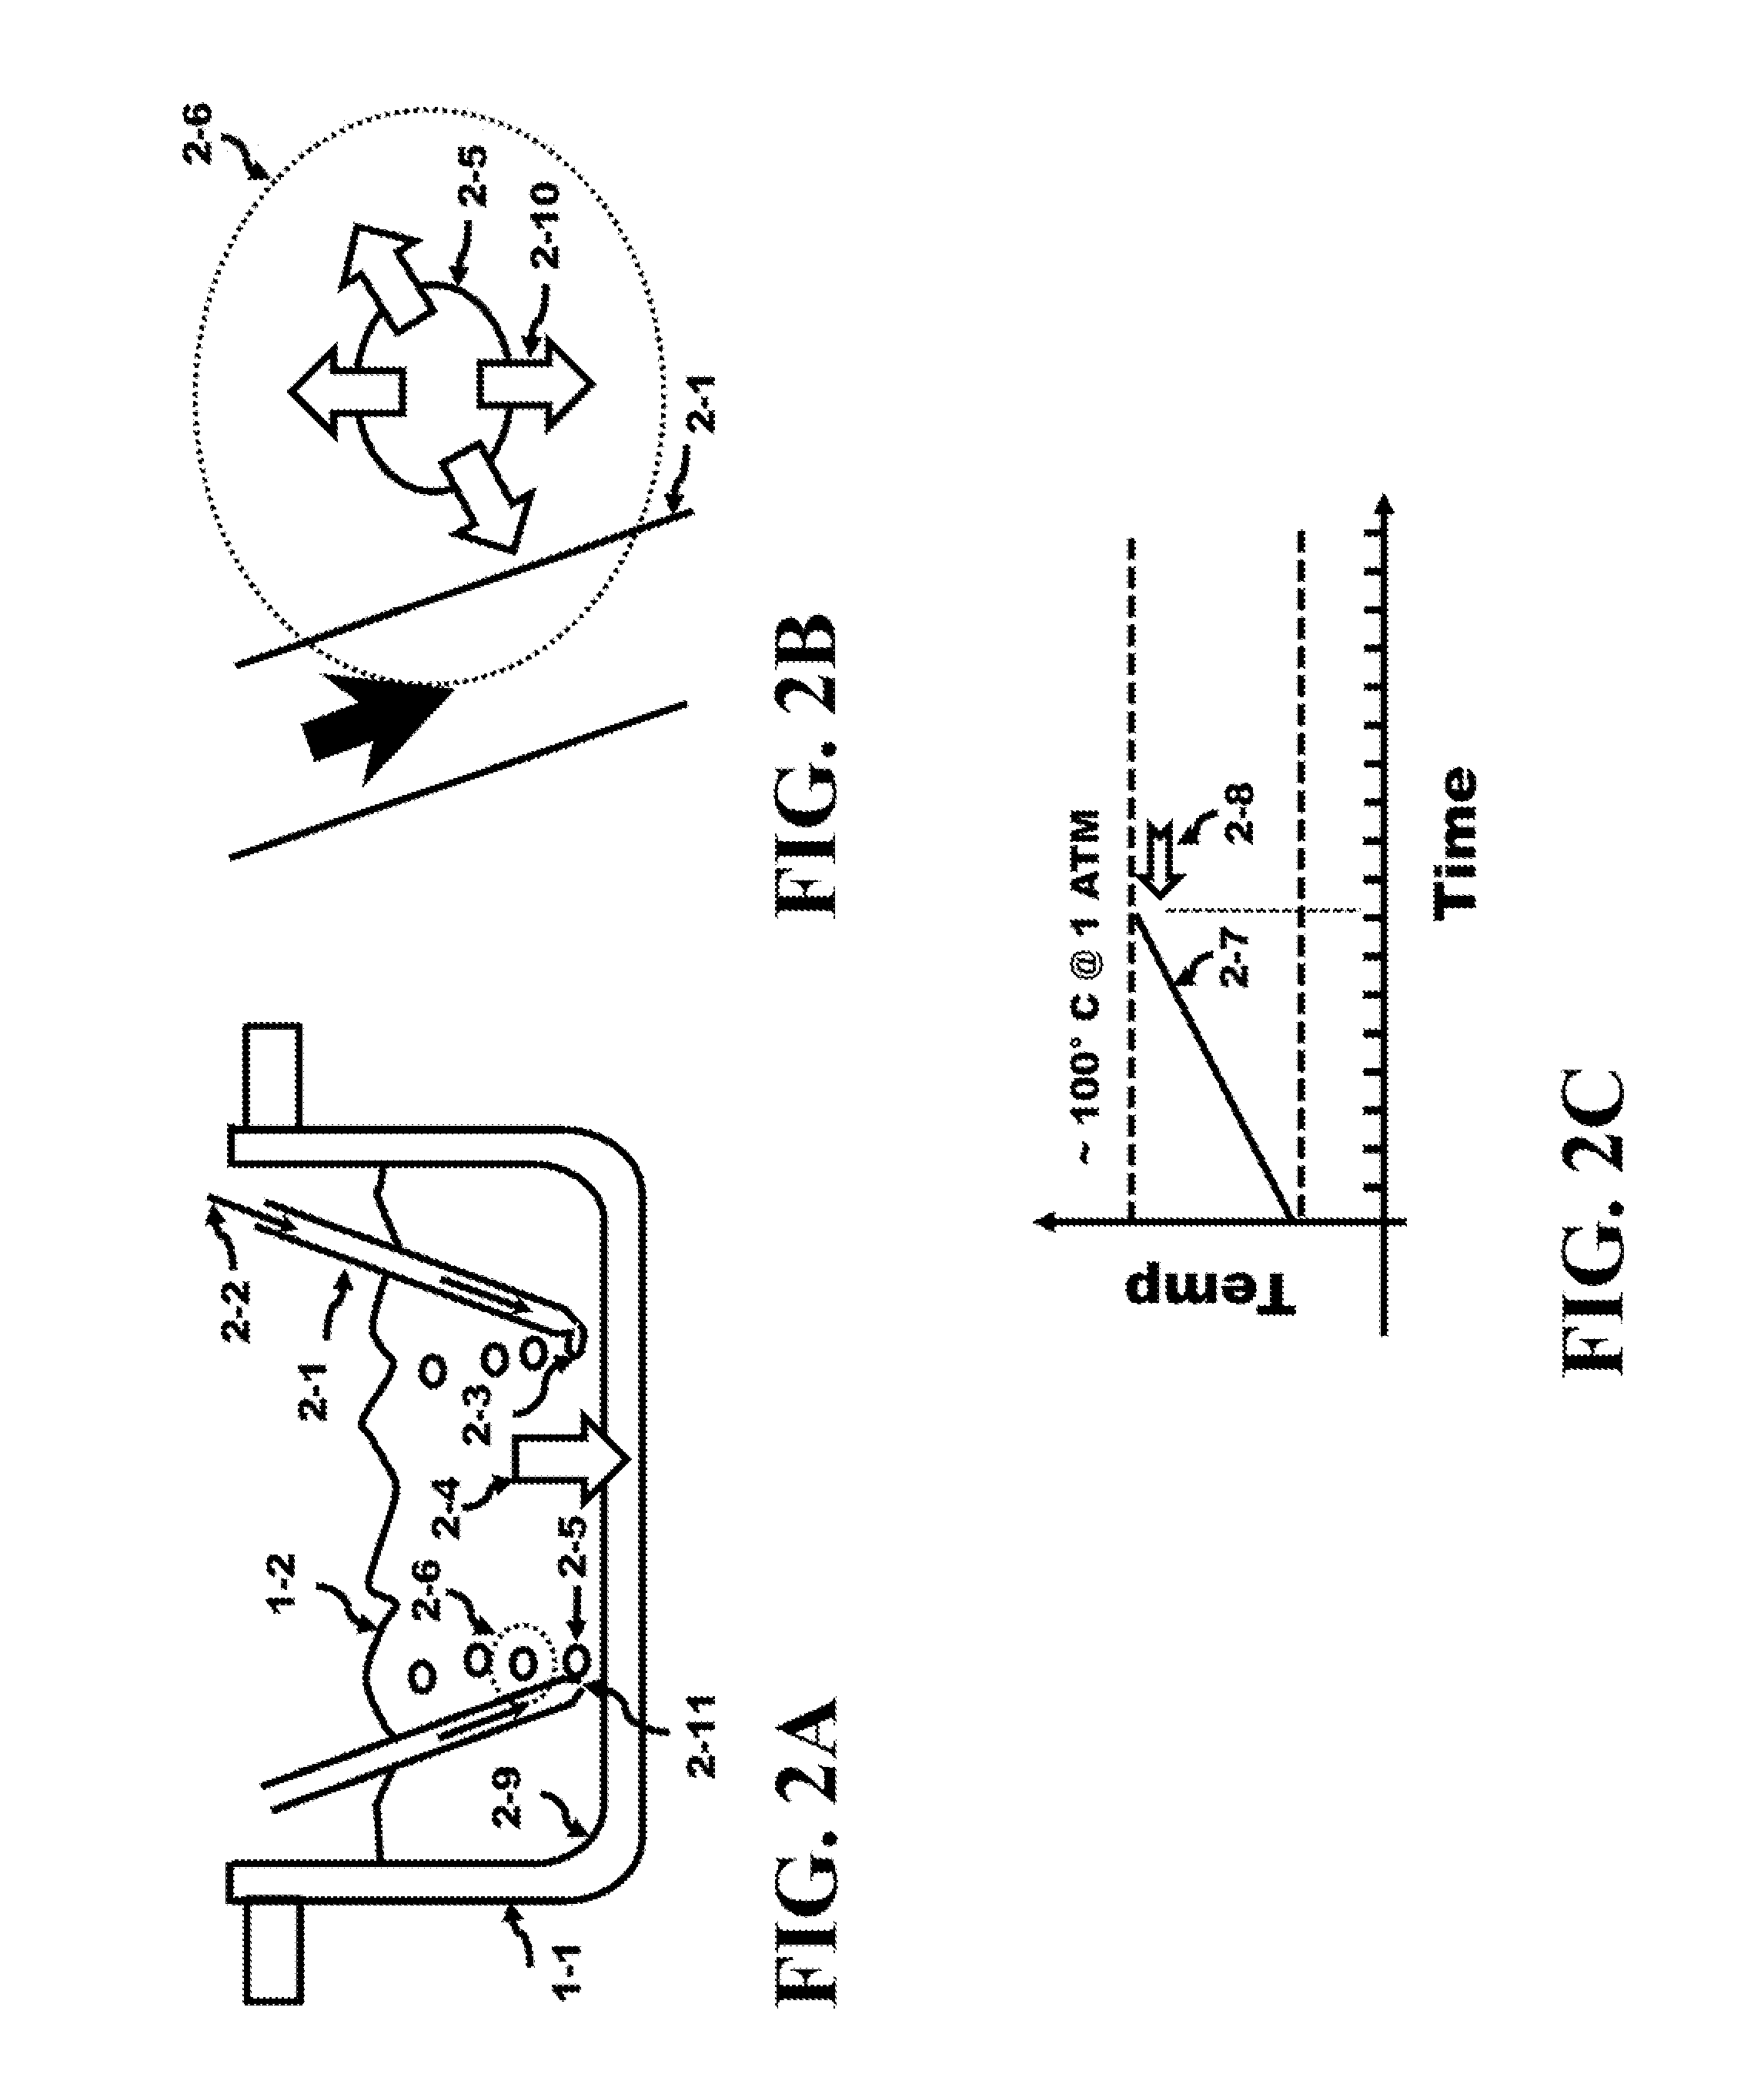 Method and Apparatus for Quickly Cooking Comestibles